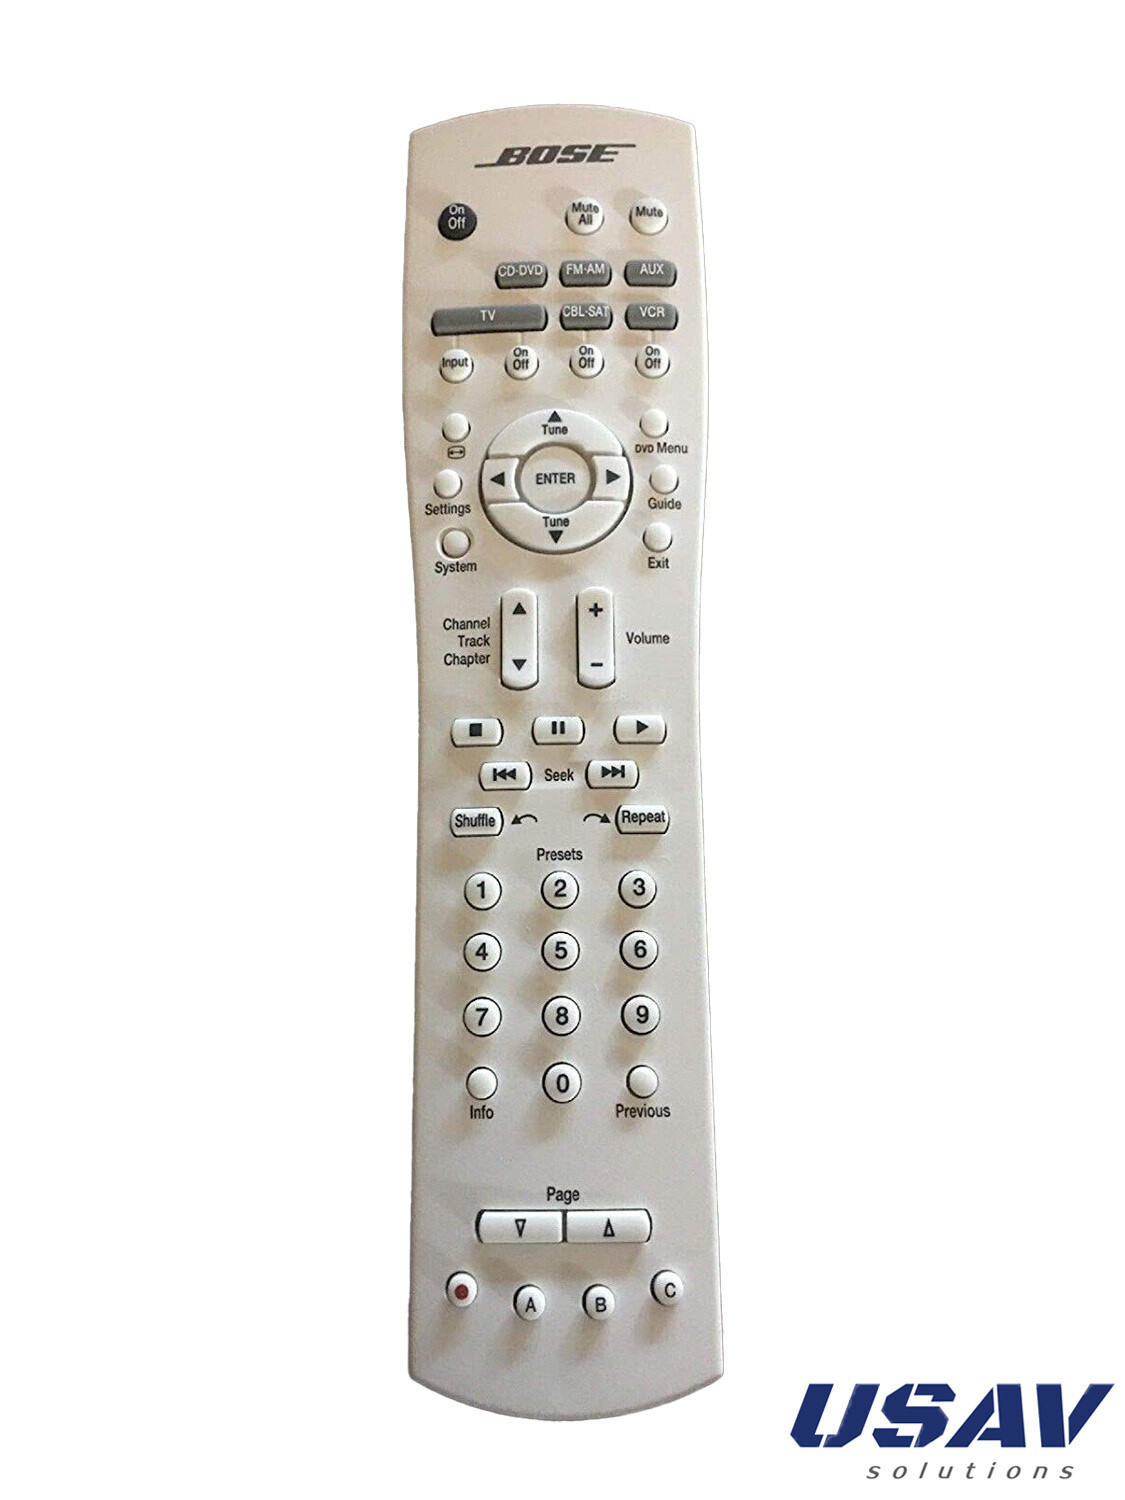 Bose Rc18t1-27 Remote Control for Lifestyle Ls 18